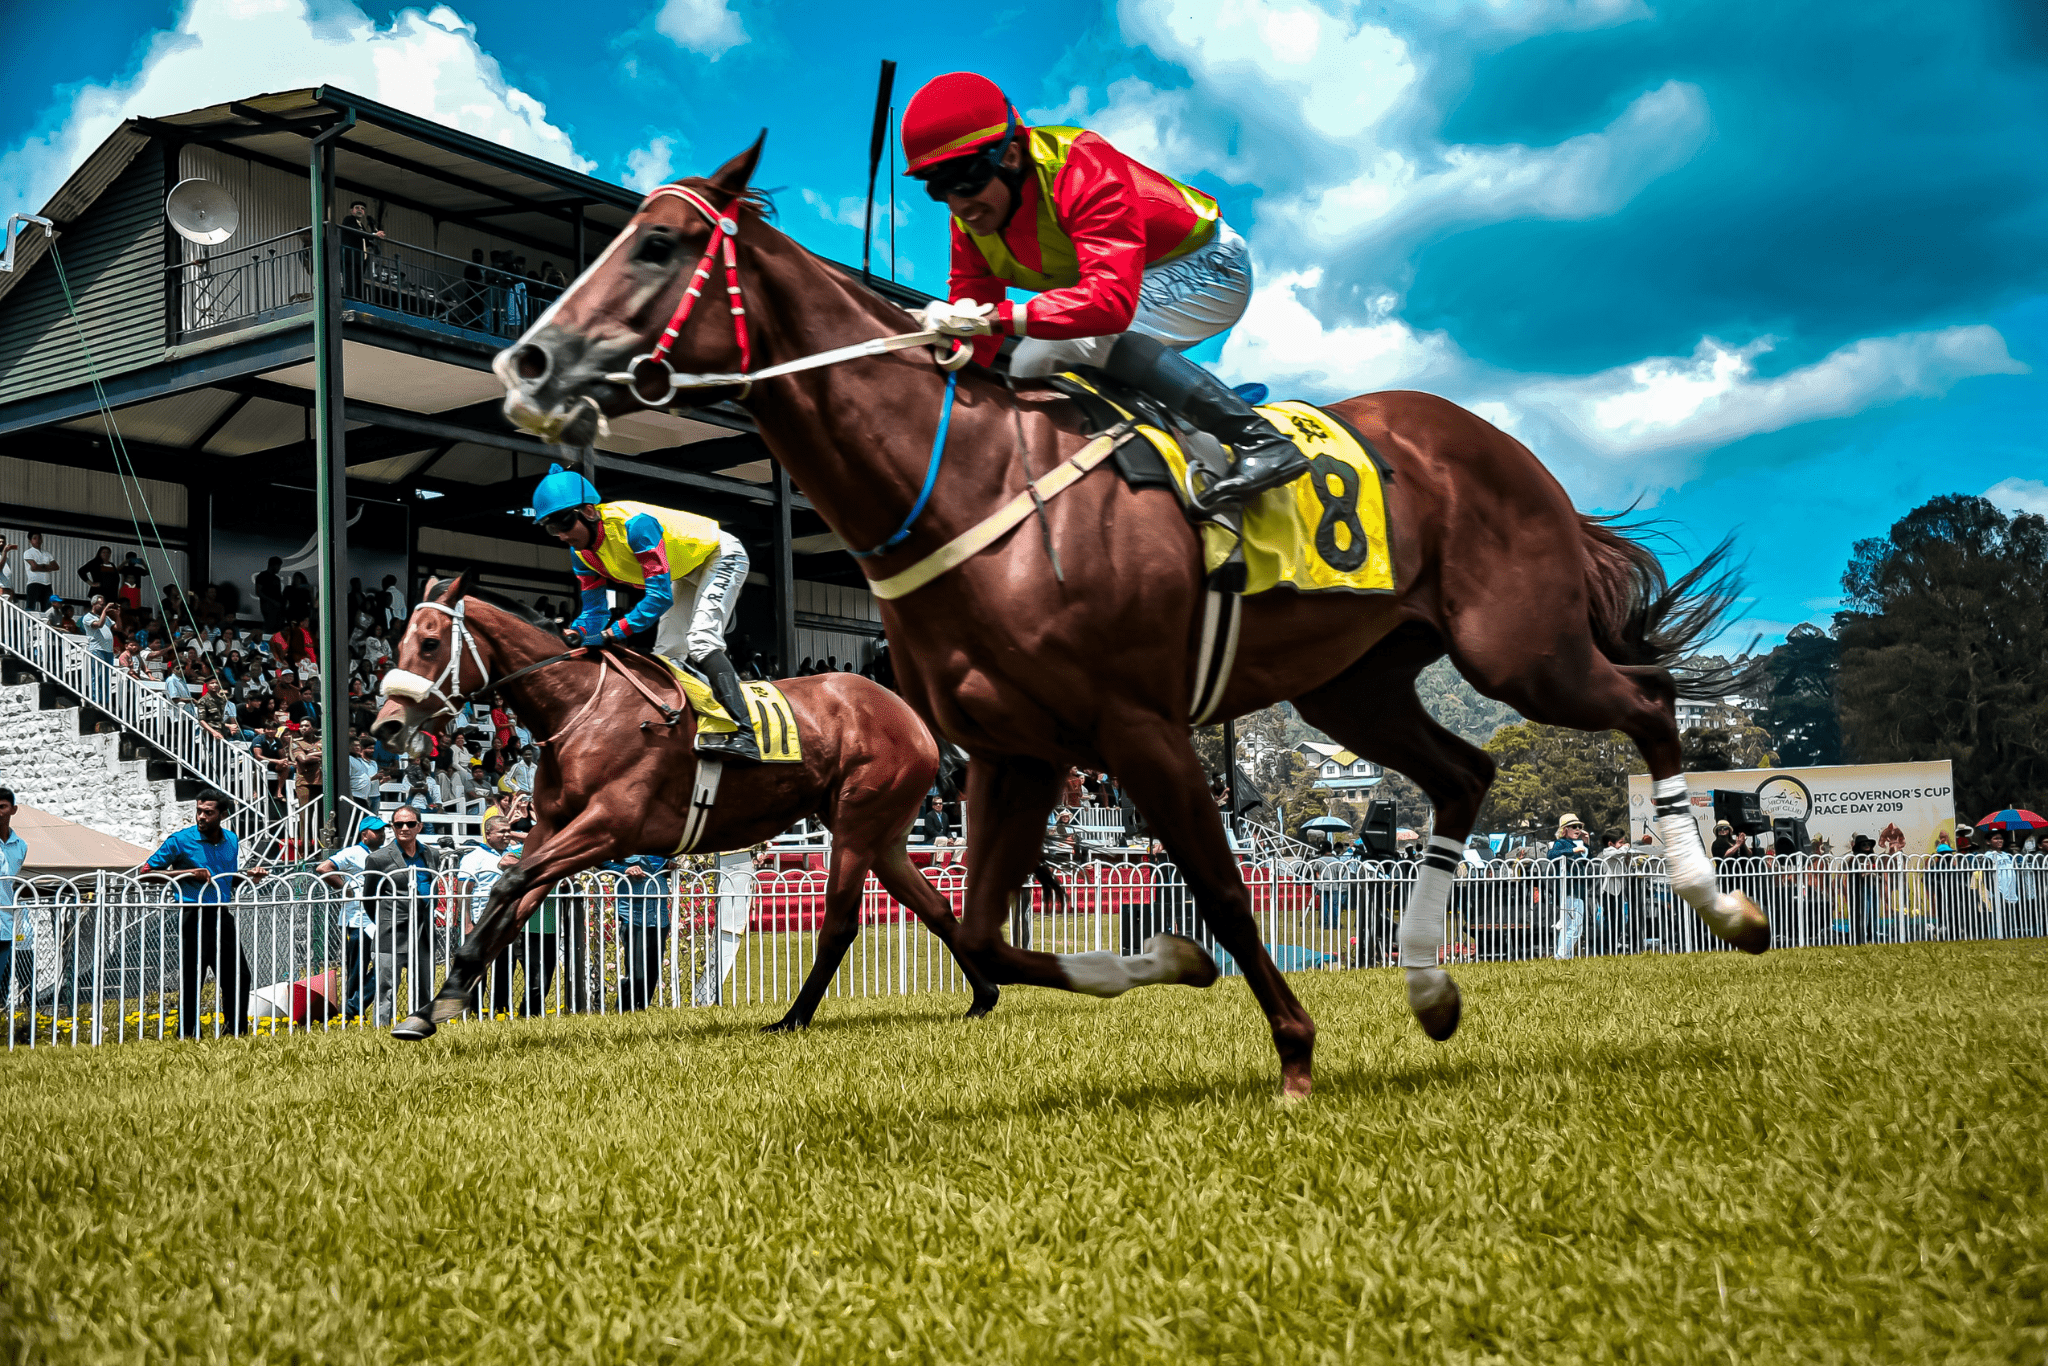 The Kentucky Derby: Financial Planning Lessons